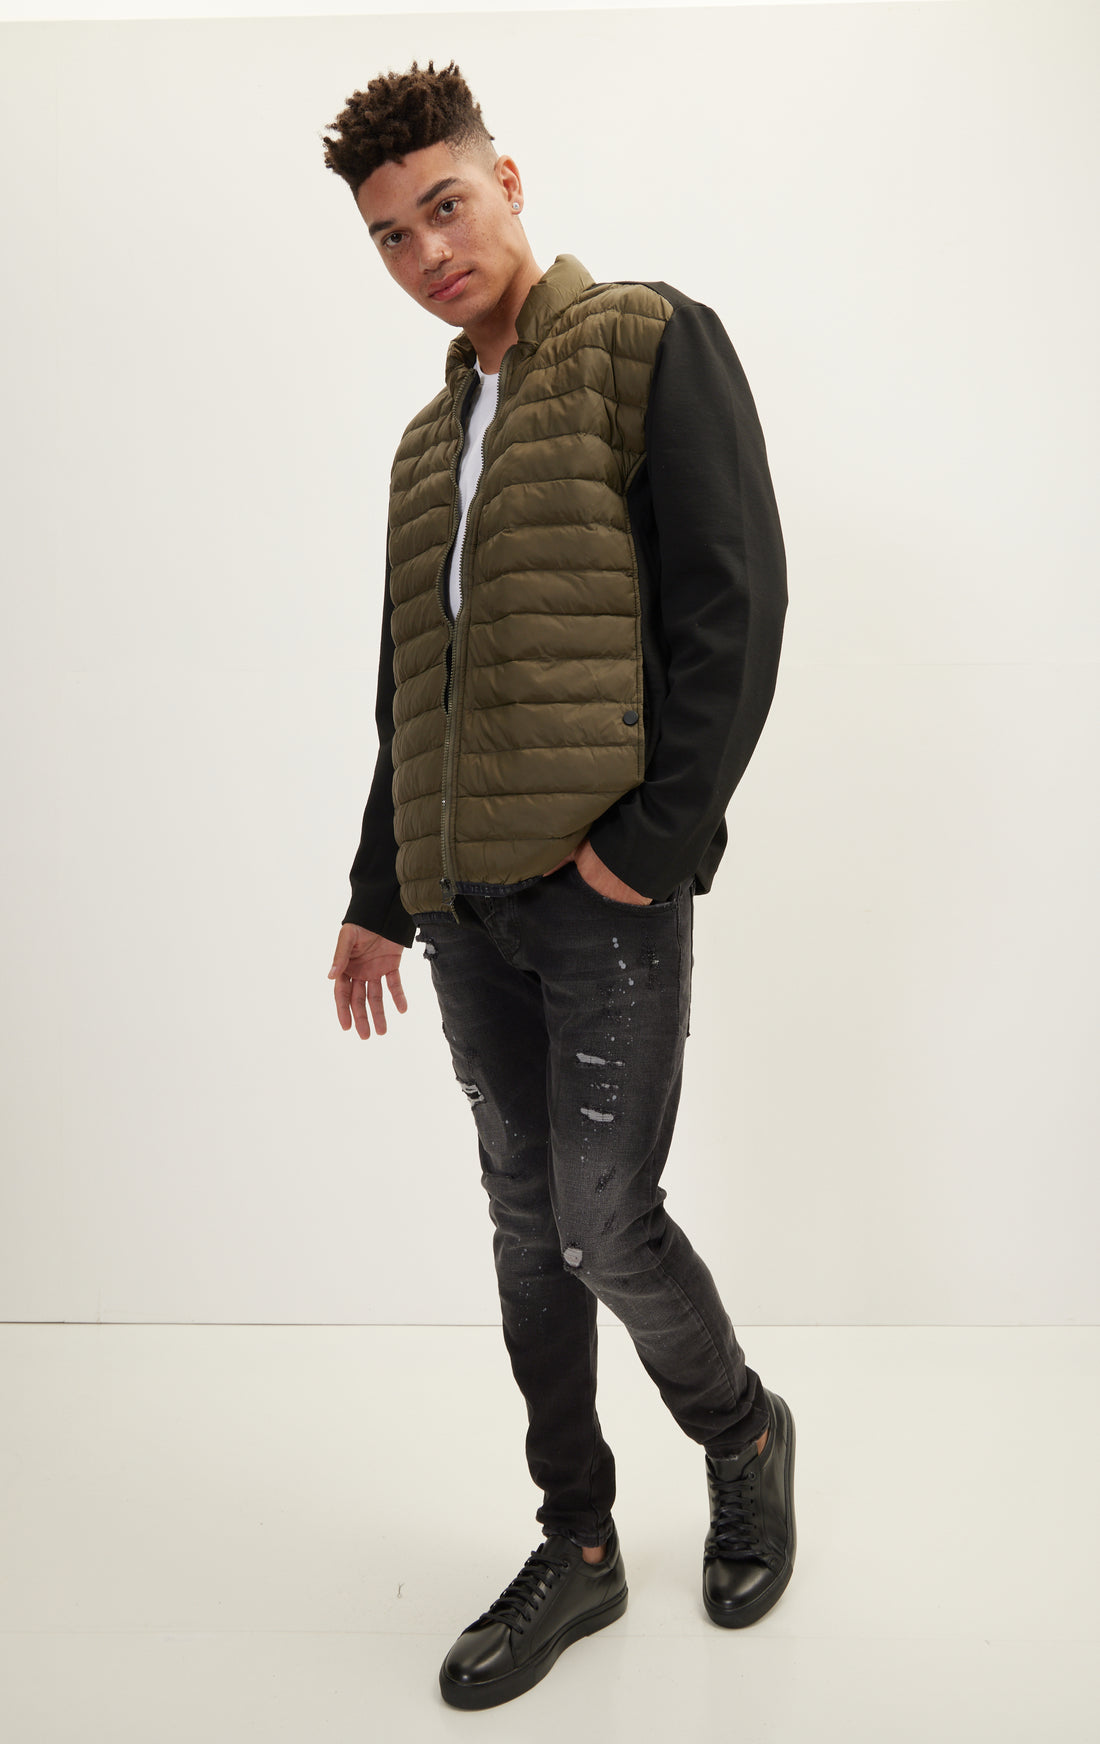 N° 71207 QUILTED PUFFER JACKET - BLACK/KHAKI